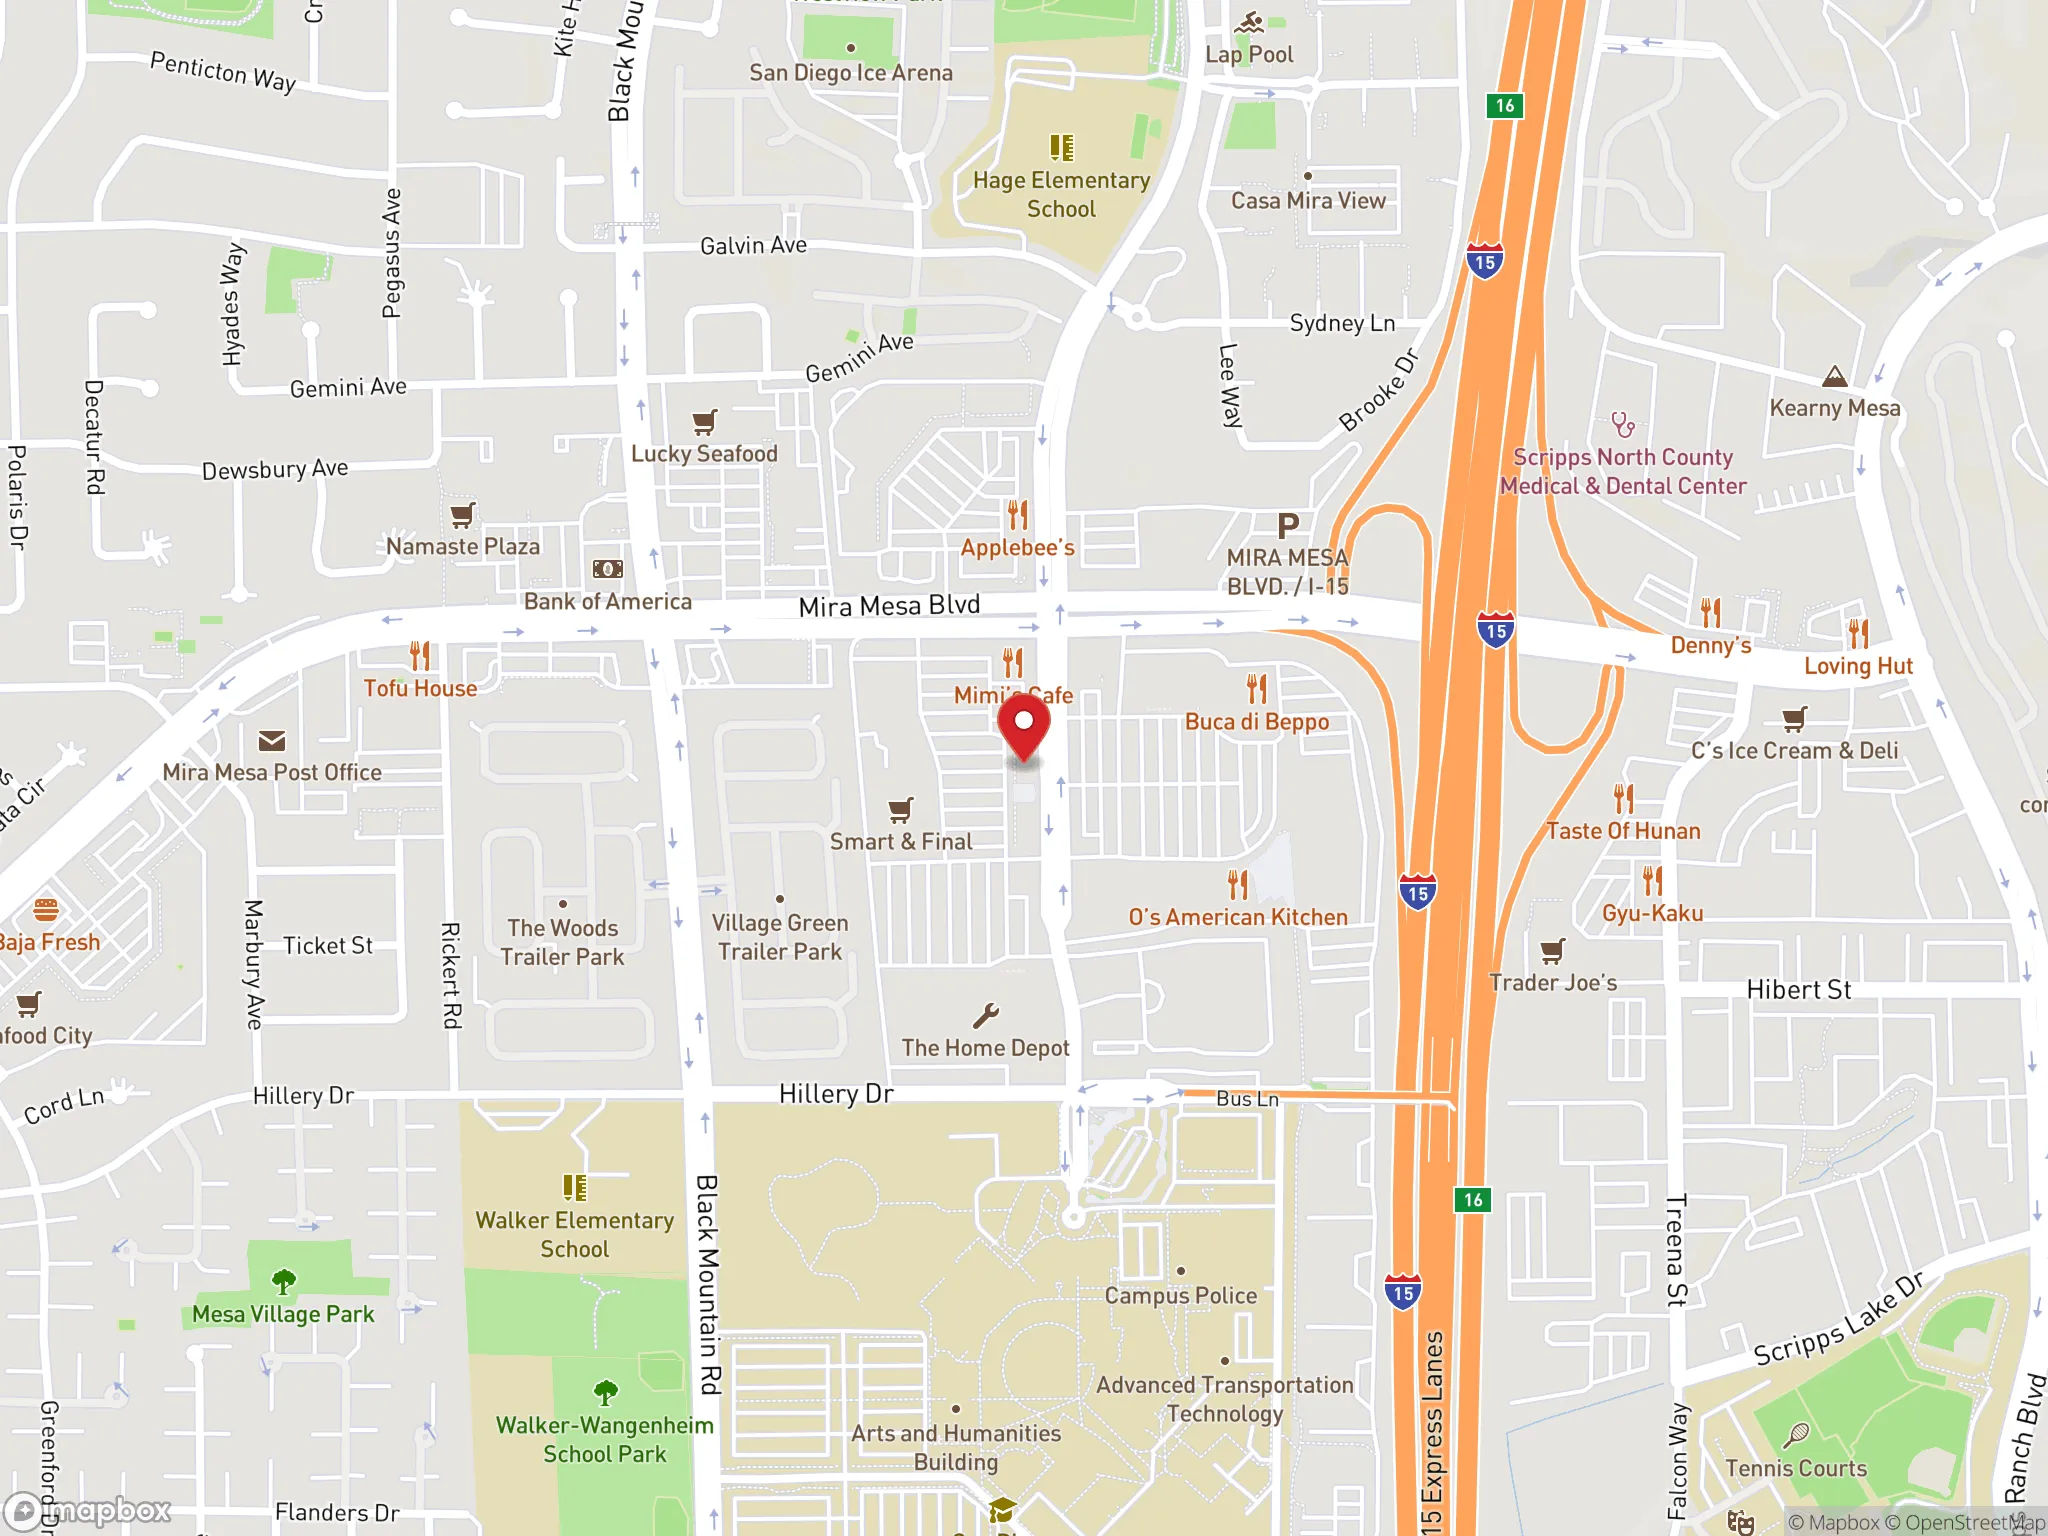 Map showing location of Dave's Hot Chicken restaurant on Westview Parkway in San Diego, California.